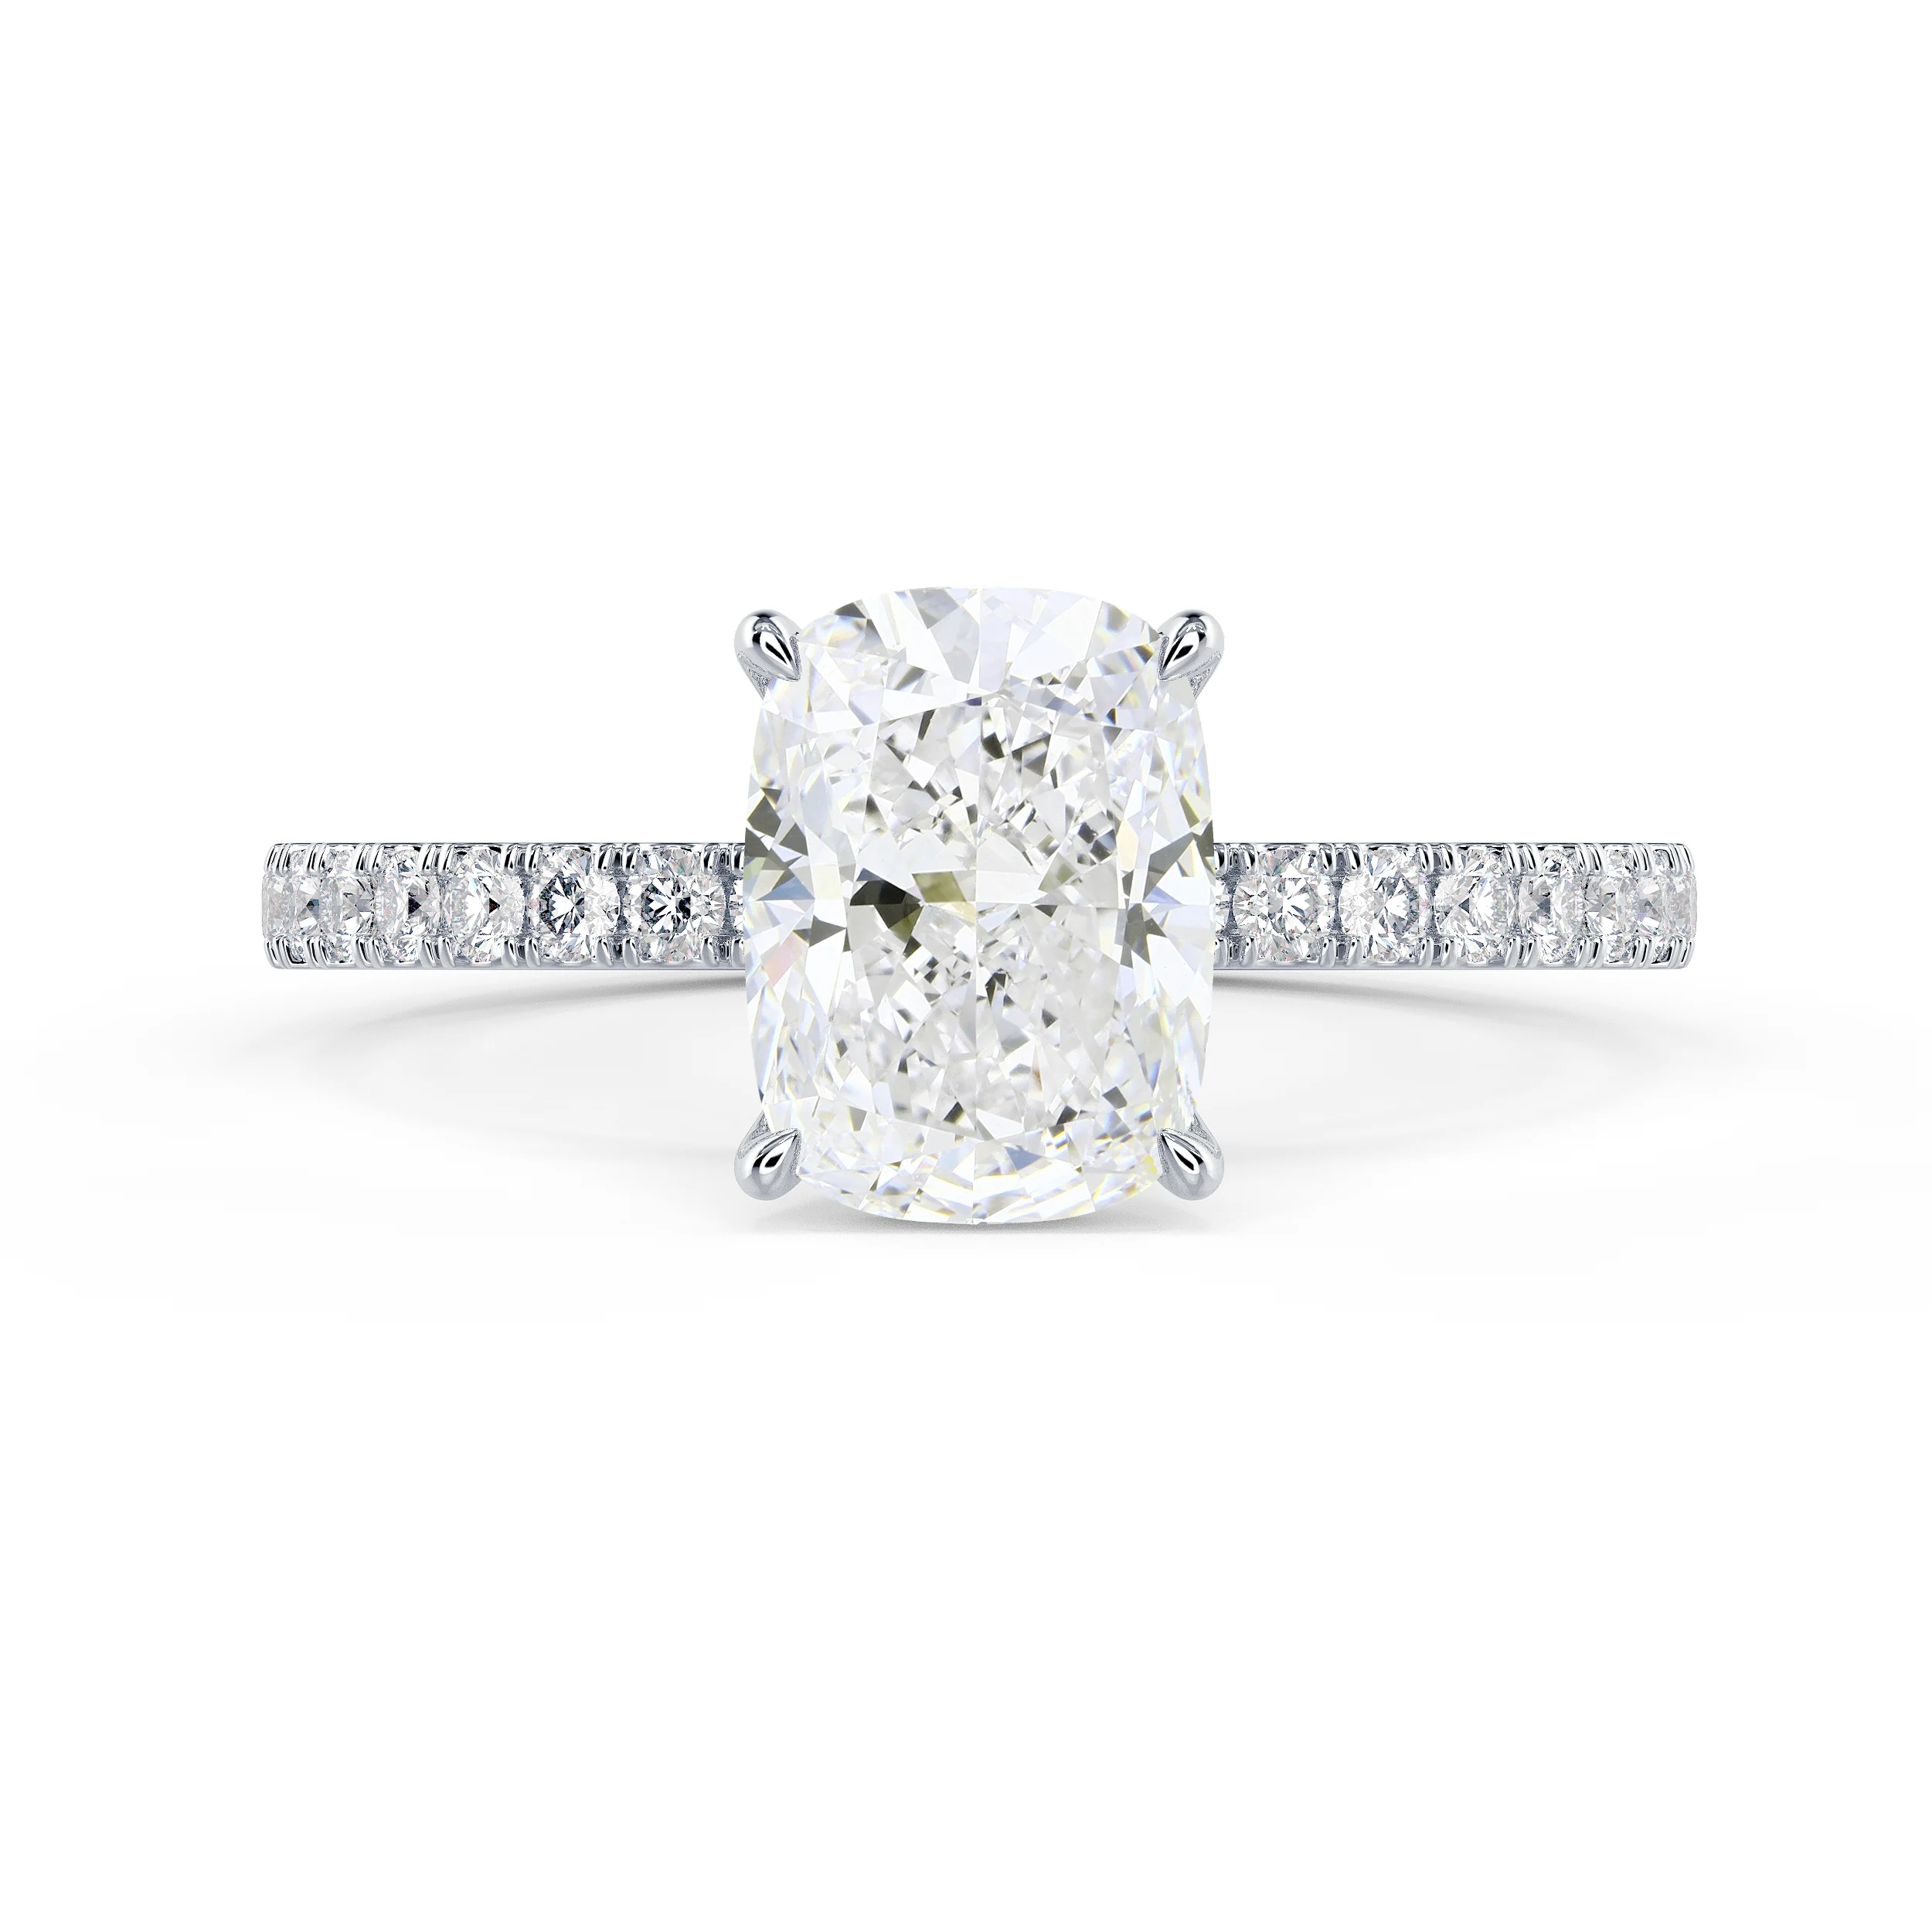 Created Diamonds Cushion Petite Four Prong Pavé Diamond Engagement Ring in White Gold (Main View)